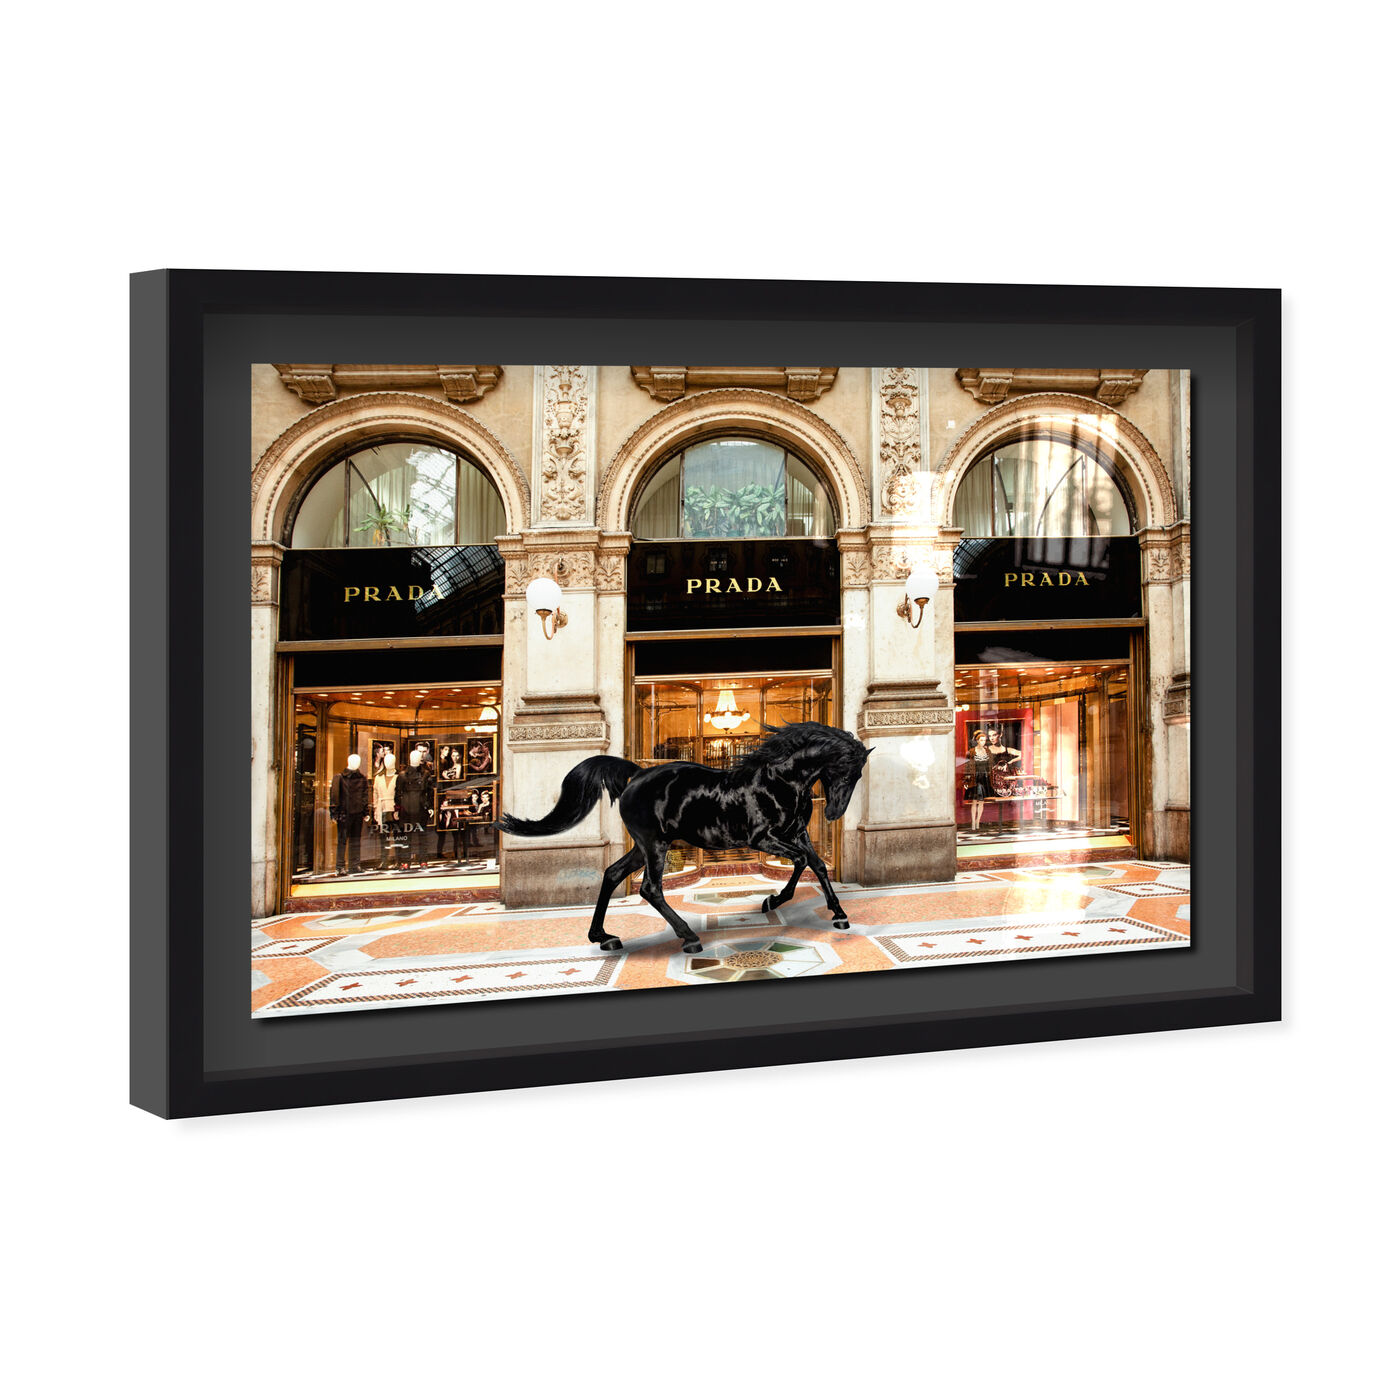 Royal Shopping in Italy - Displayed in a shadowbox